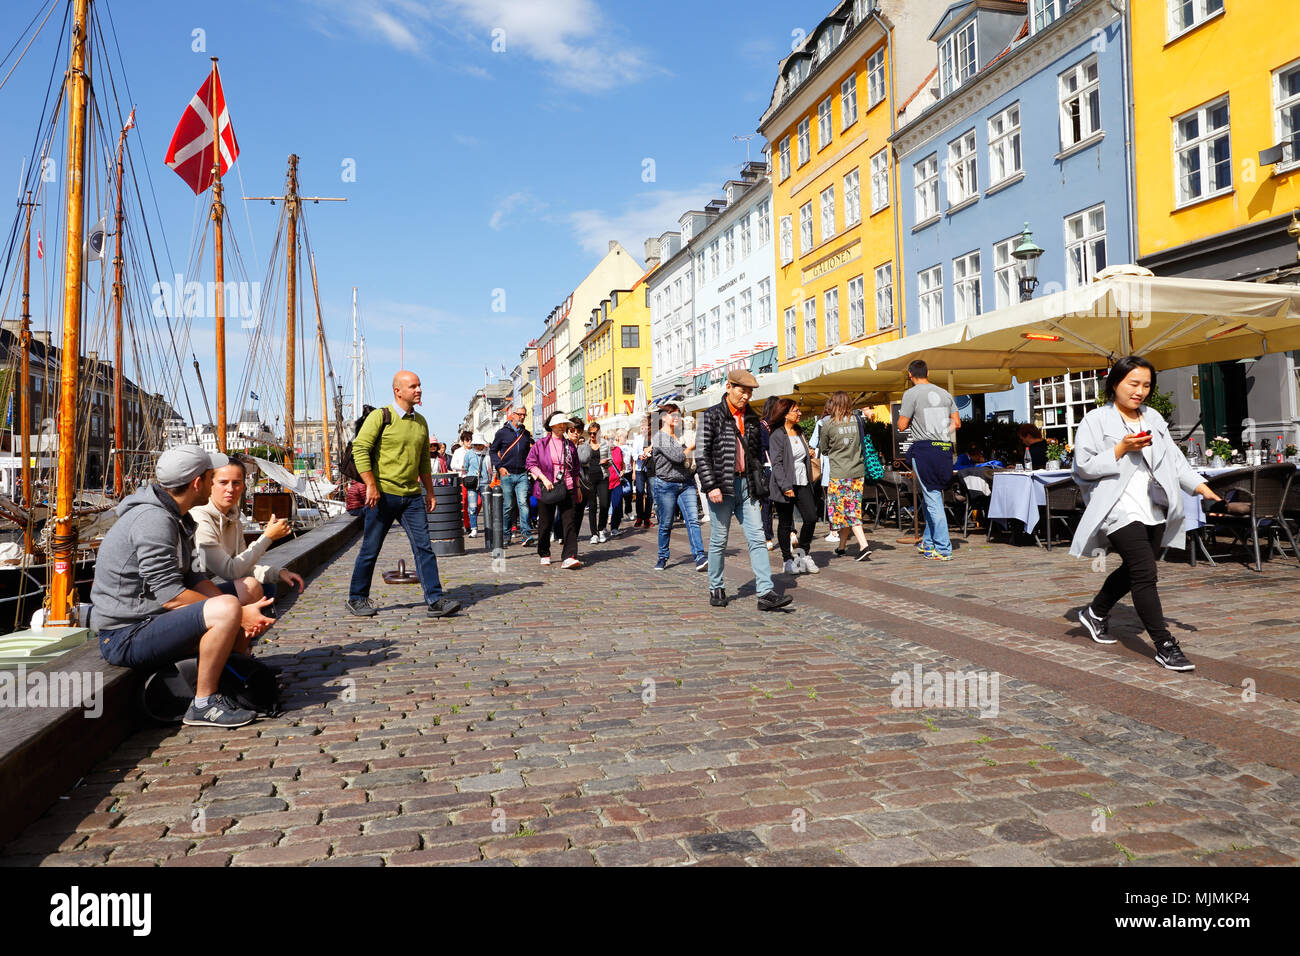 Copenhagen, Denmark - August 24, 2017: People valking the street in Nyhavn there restaurants with outdoor seating are located. Stock Photo